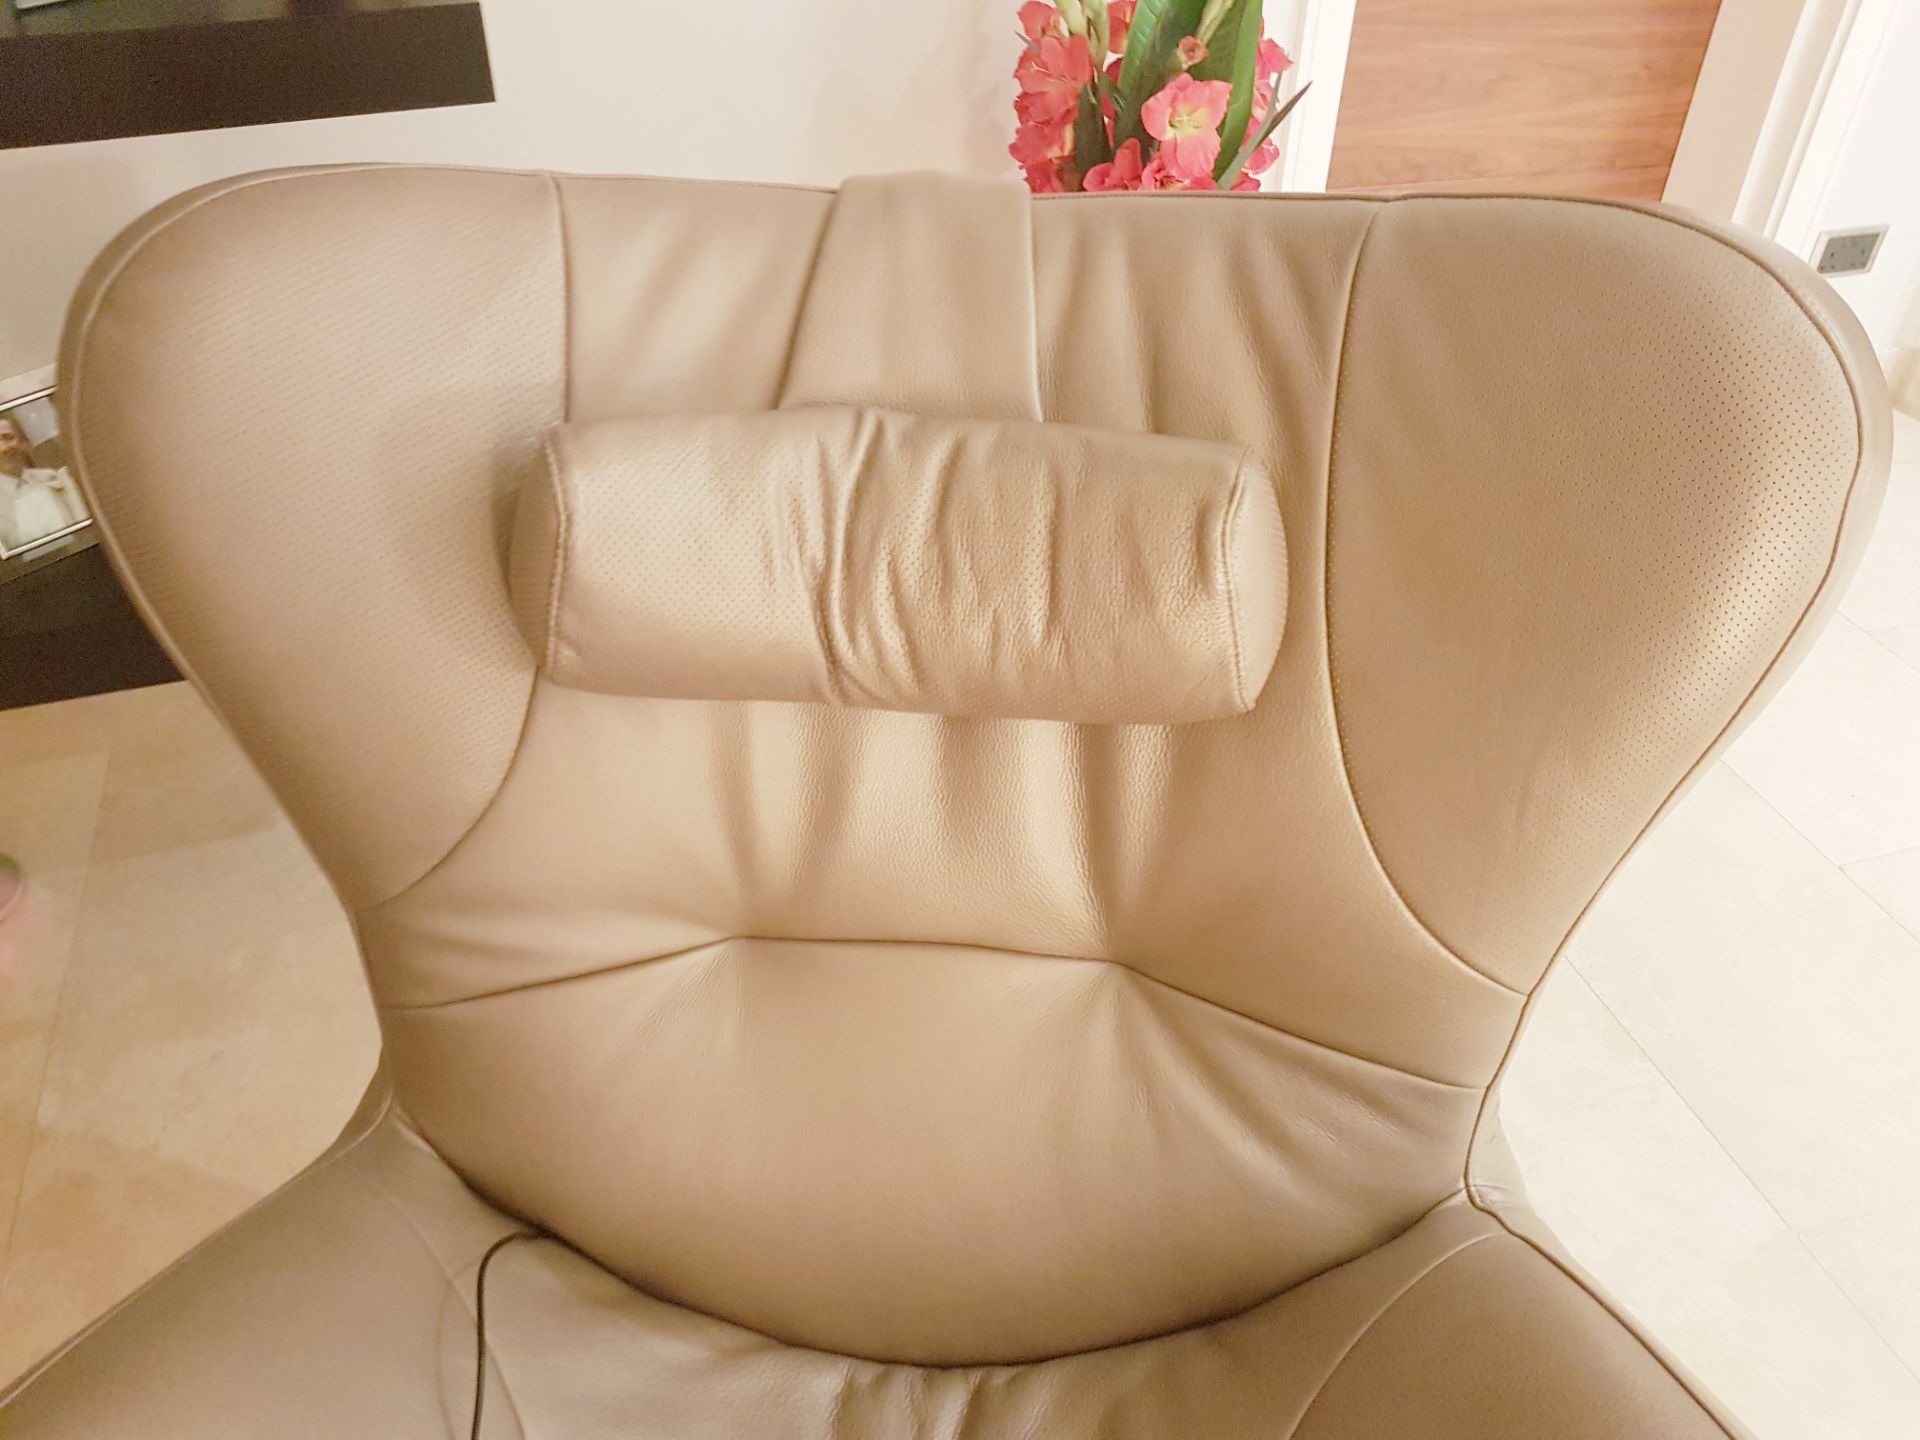 1 x Natuzzi Leather Upholstered Swivel Chair With In-built Speakers - CL250 - Ref: MT643 - - Image 2 of 5